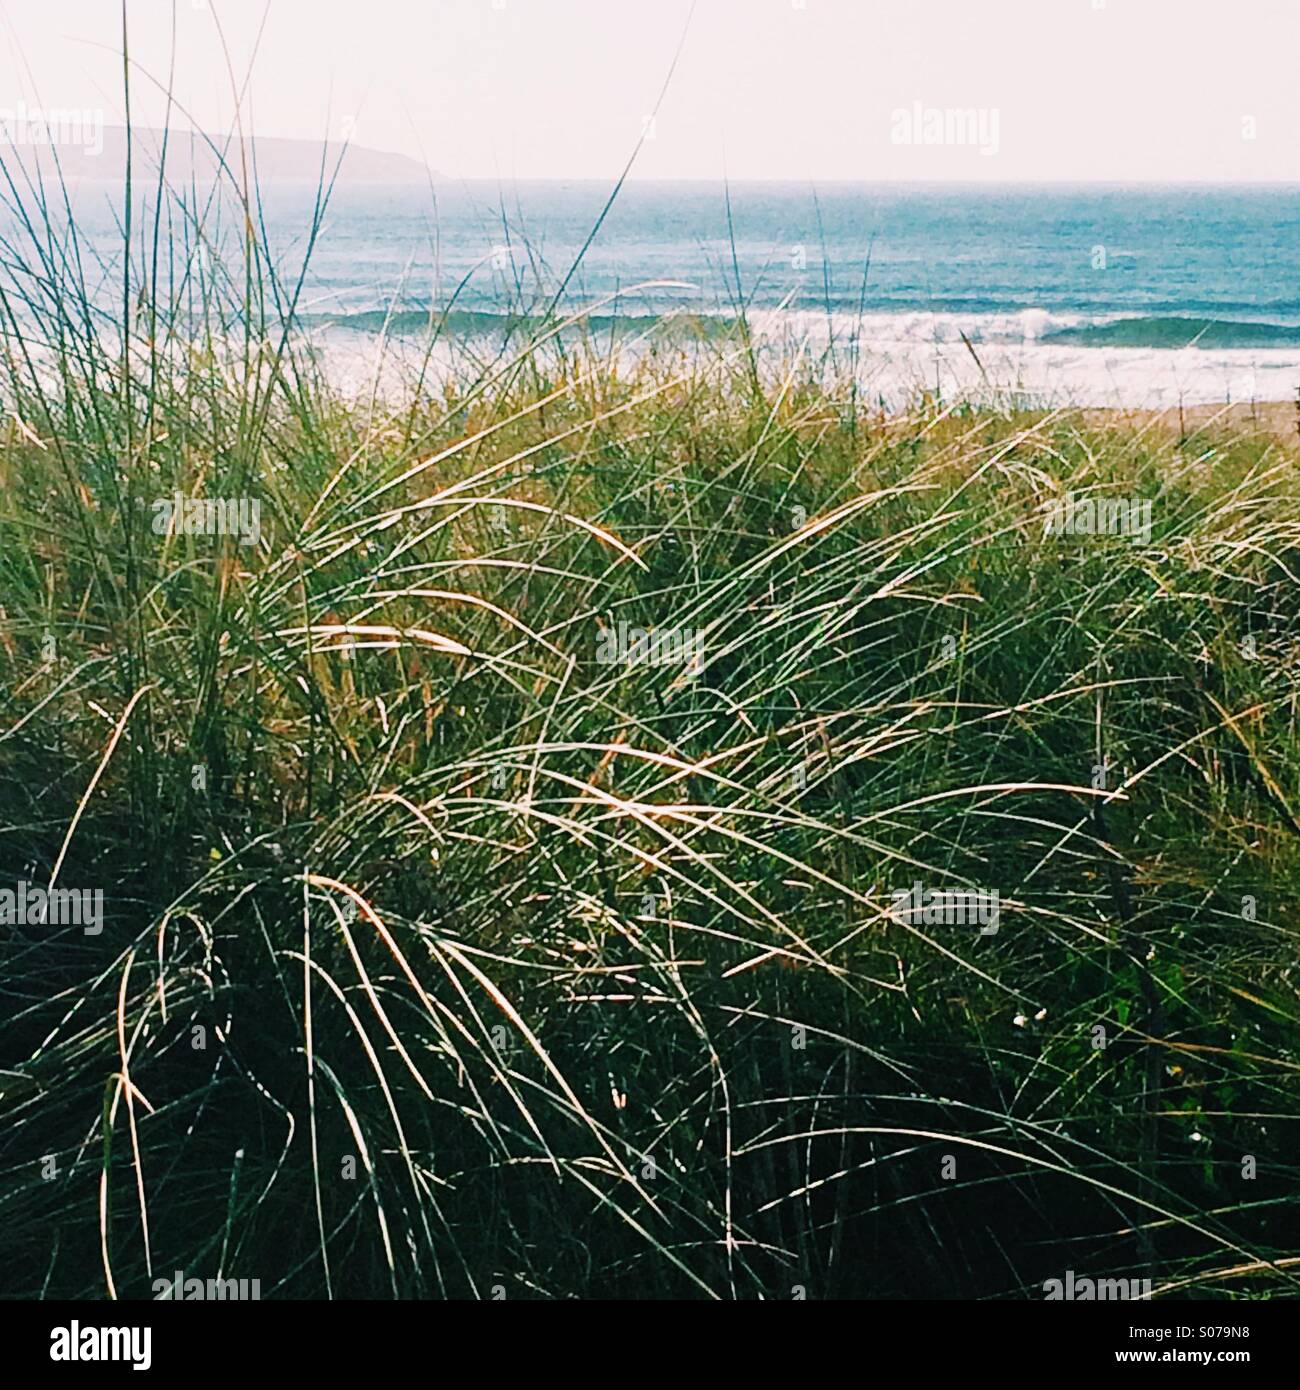 View of the ocean with waves rolling in through coastal grasses. Stock Photo